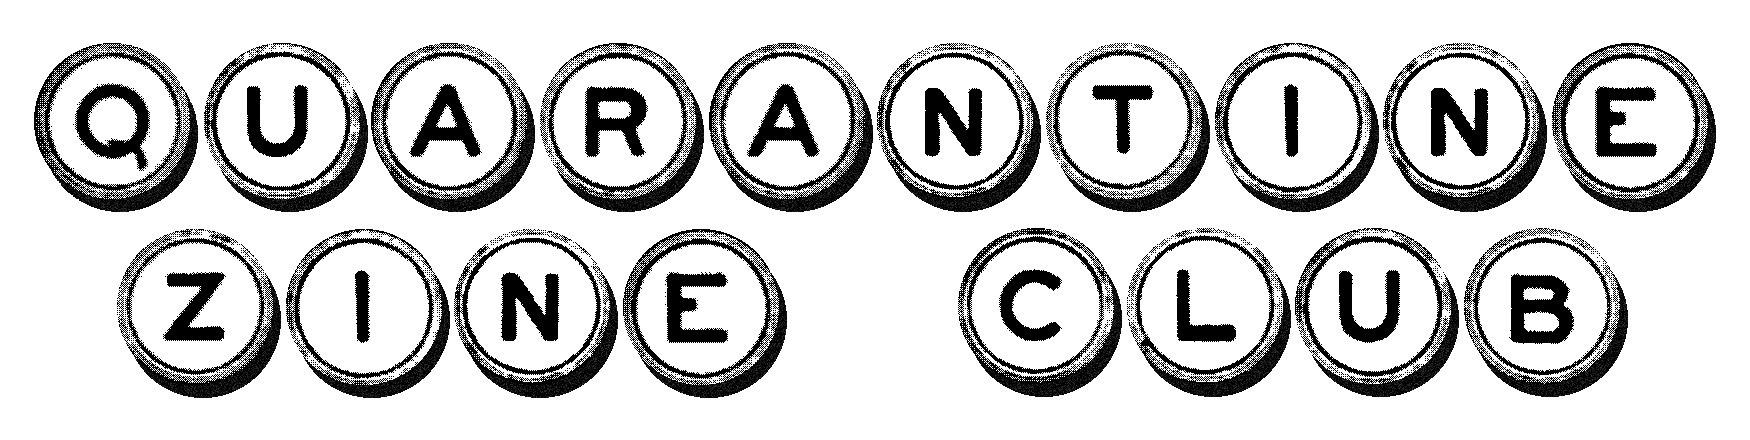 The header image of the Quarantine Zine Club website. Each letter is a black and white representation of a typewriter key.